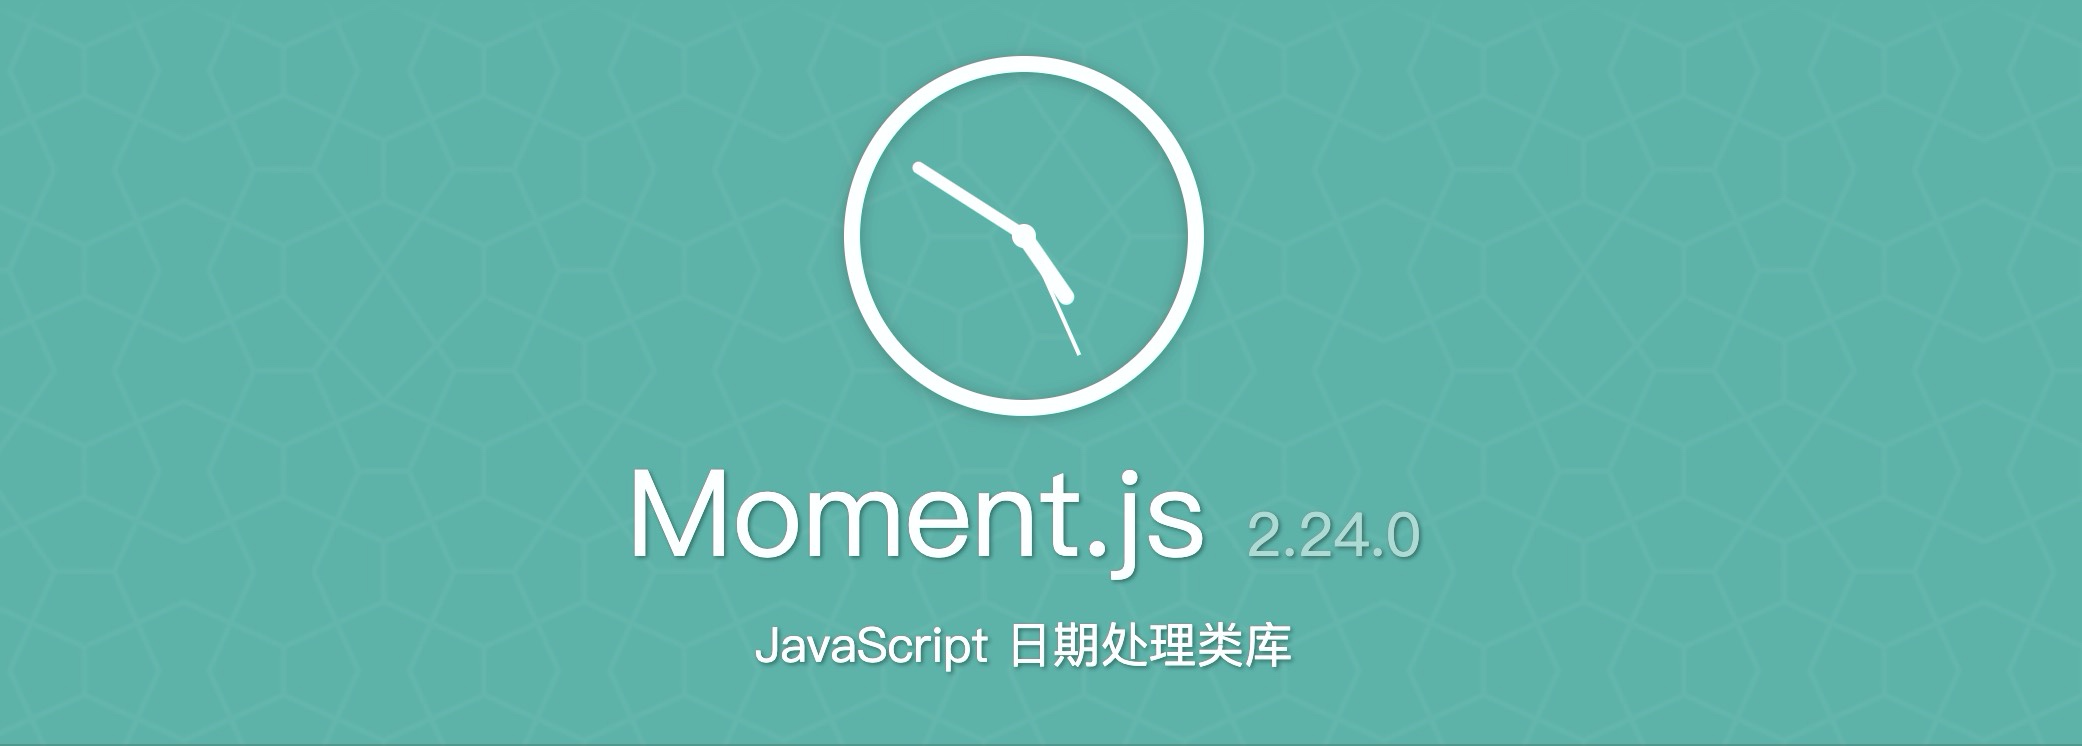 Display date. Moment js.